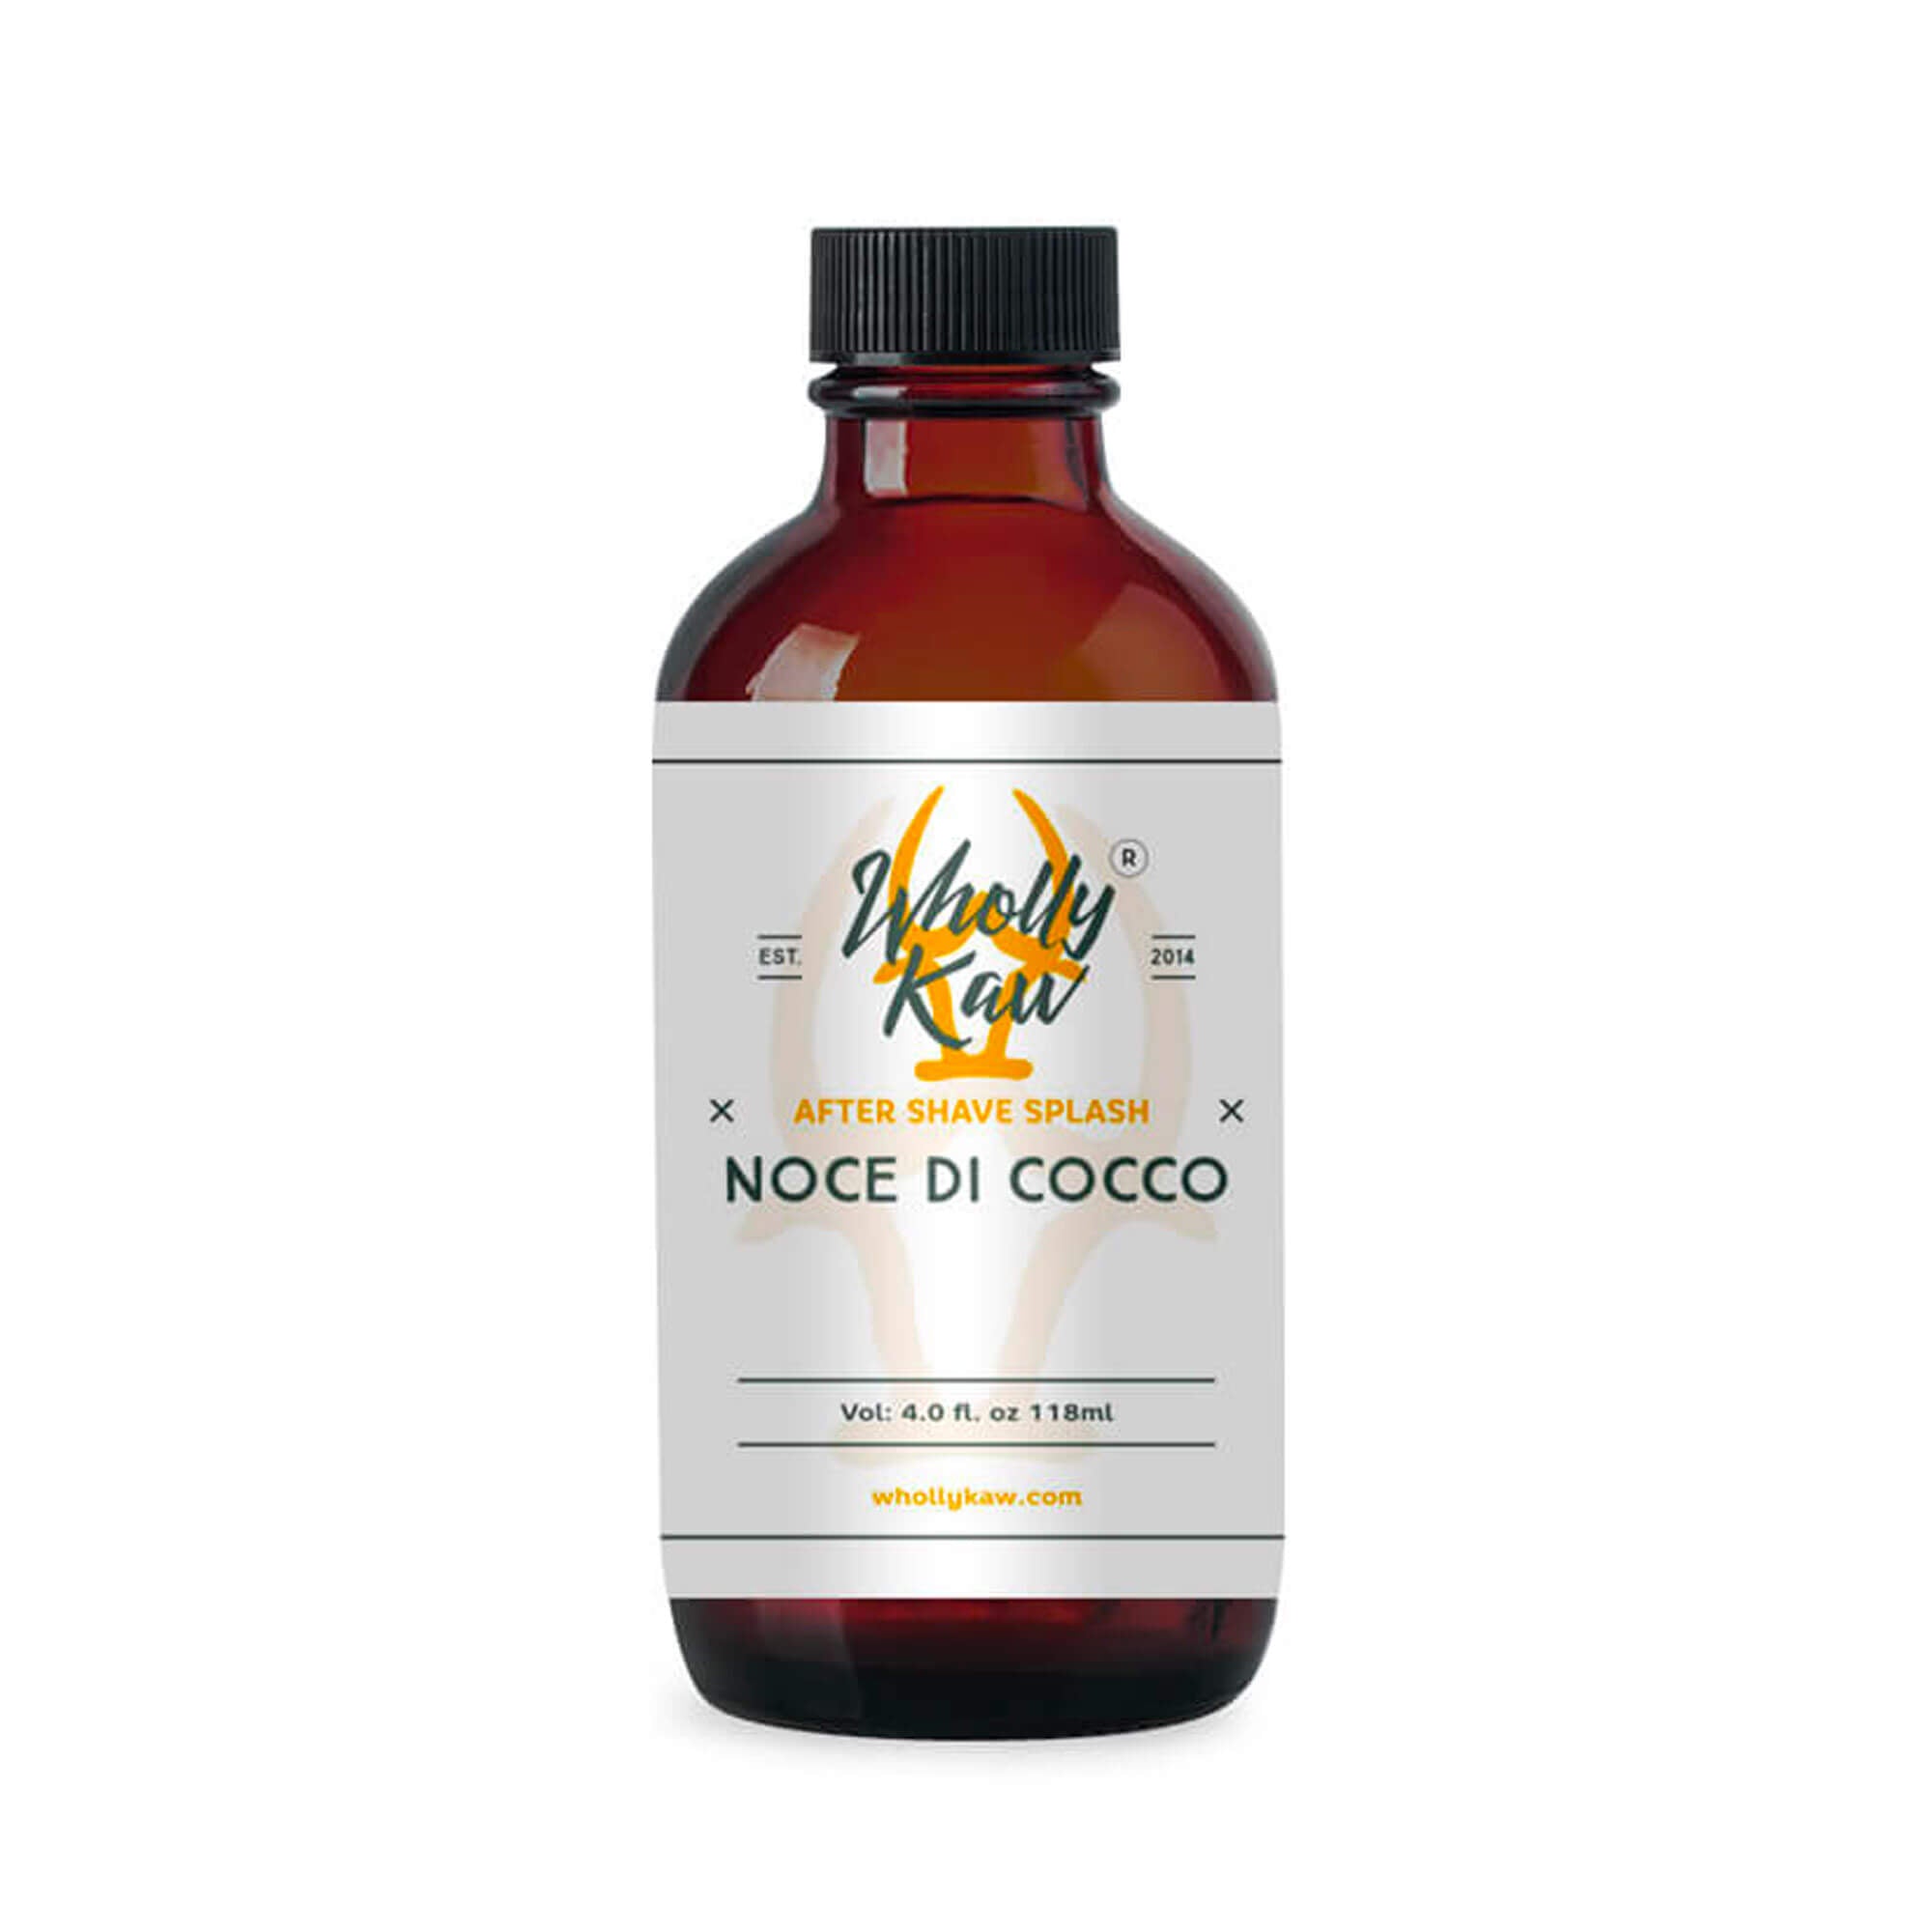 Wholly Kaw Noce Di Cocco Aftershave Splash